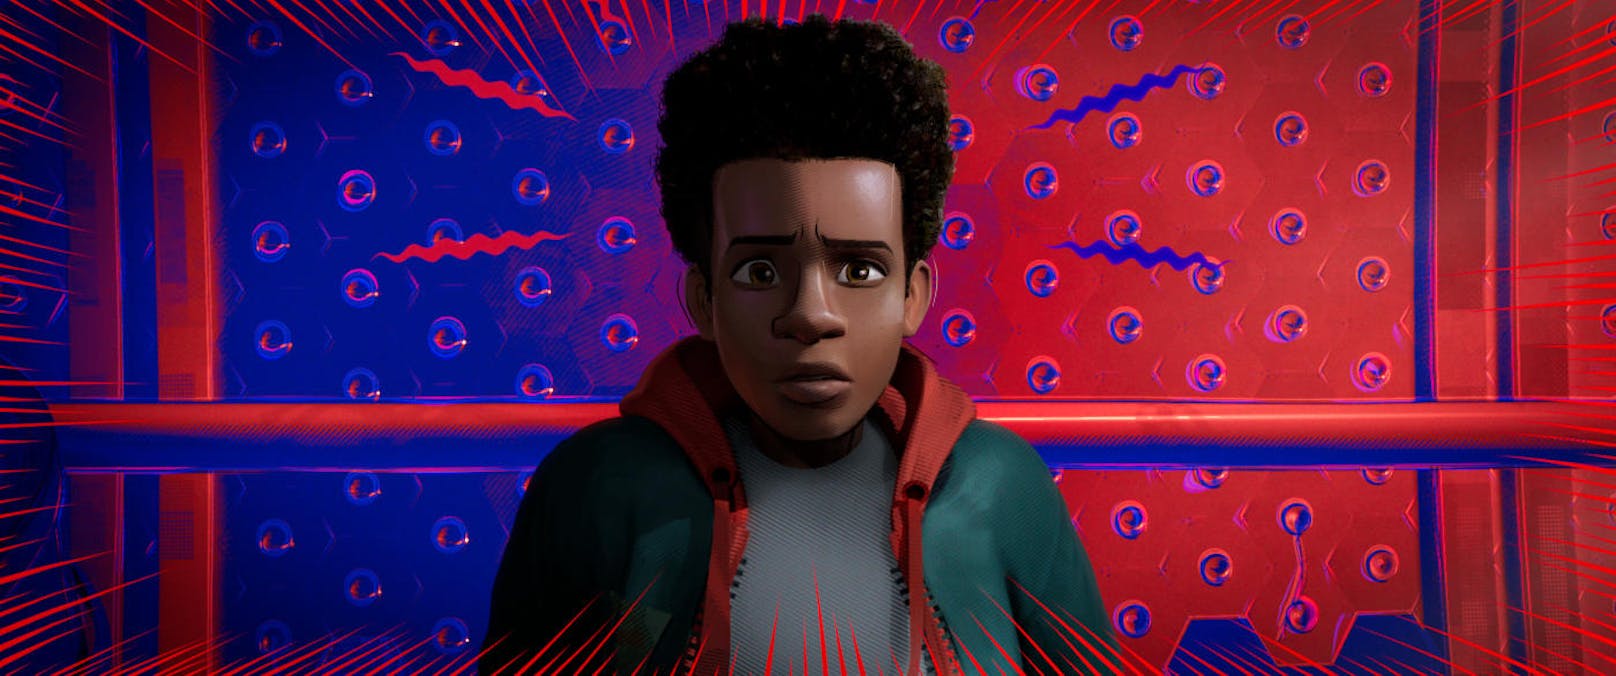 Miles Morales in "Spider-Man: A New Universe"